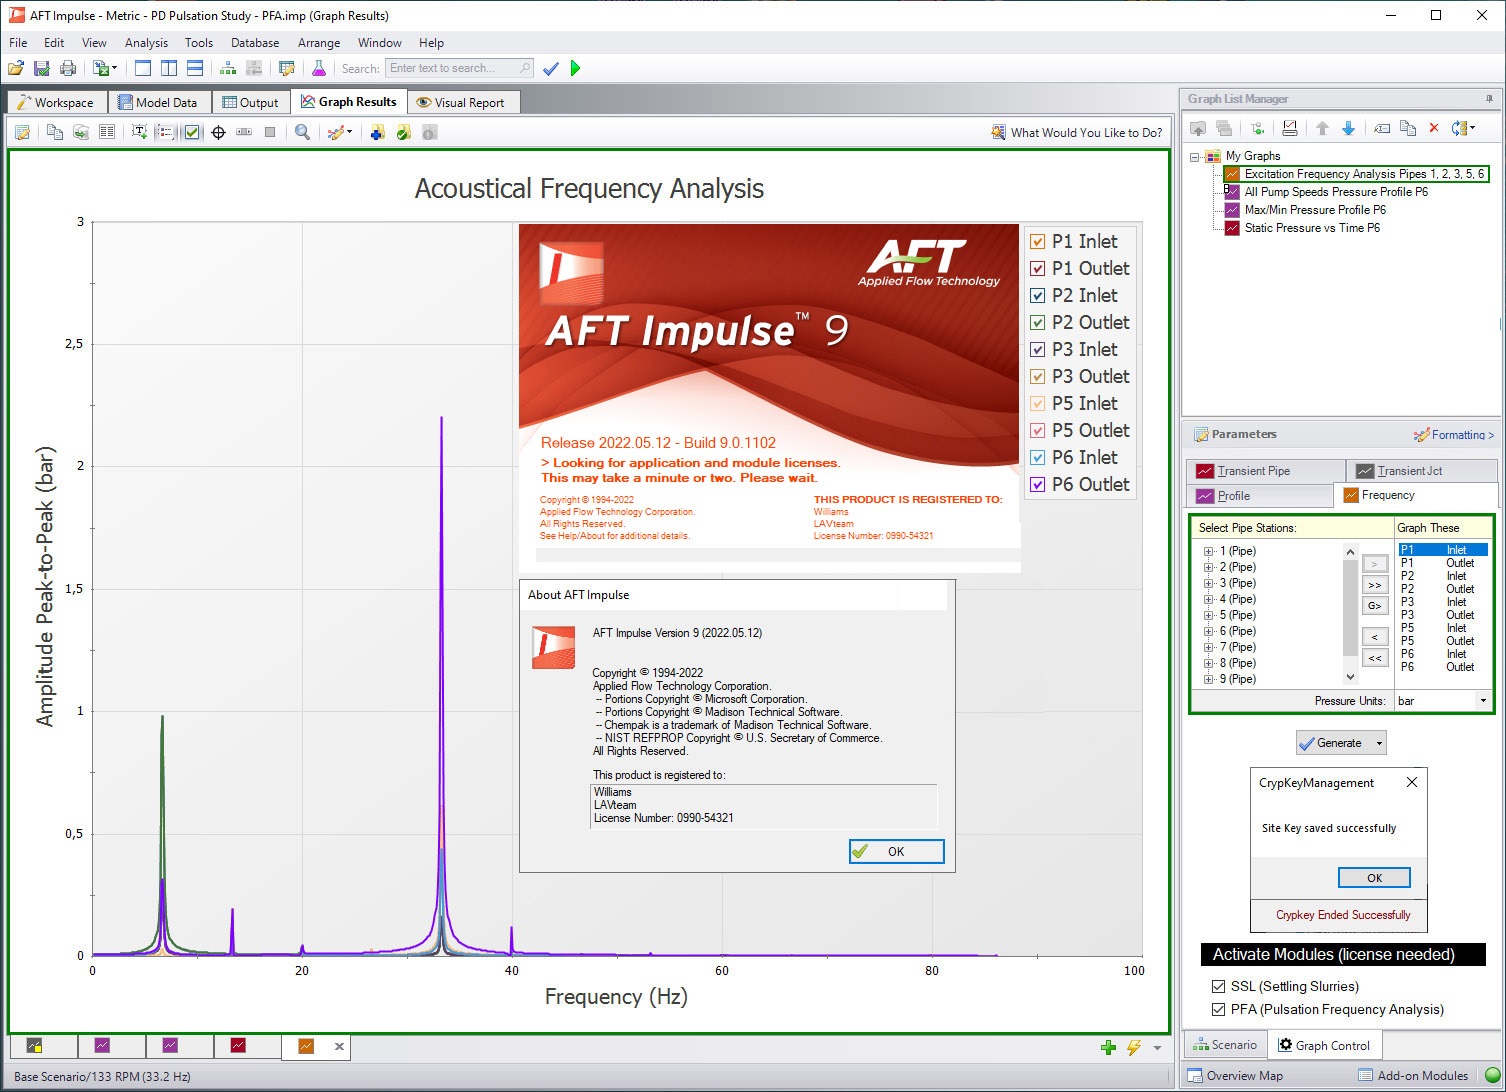 Working with AFT Impulse 9.0.1102